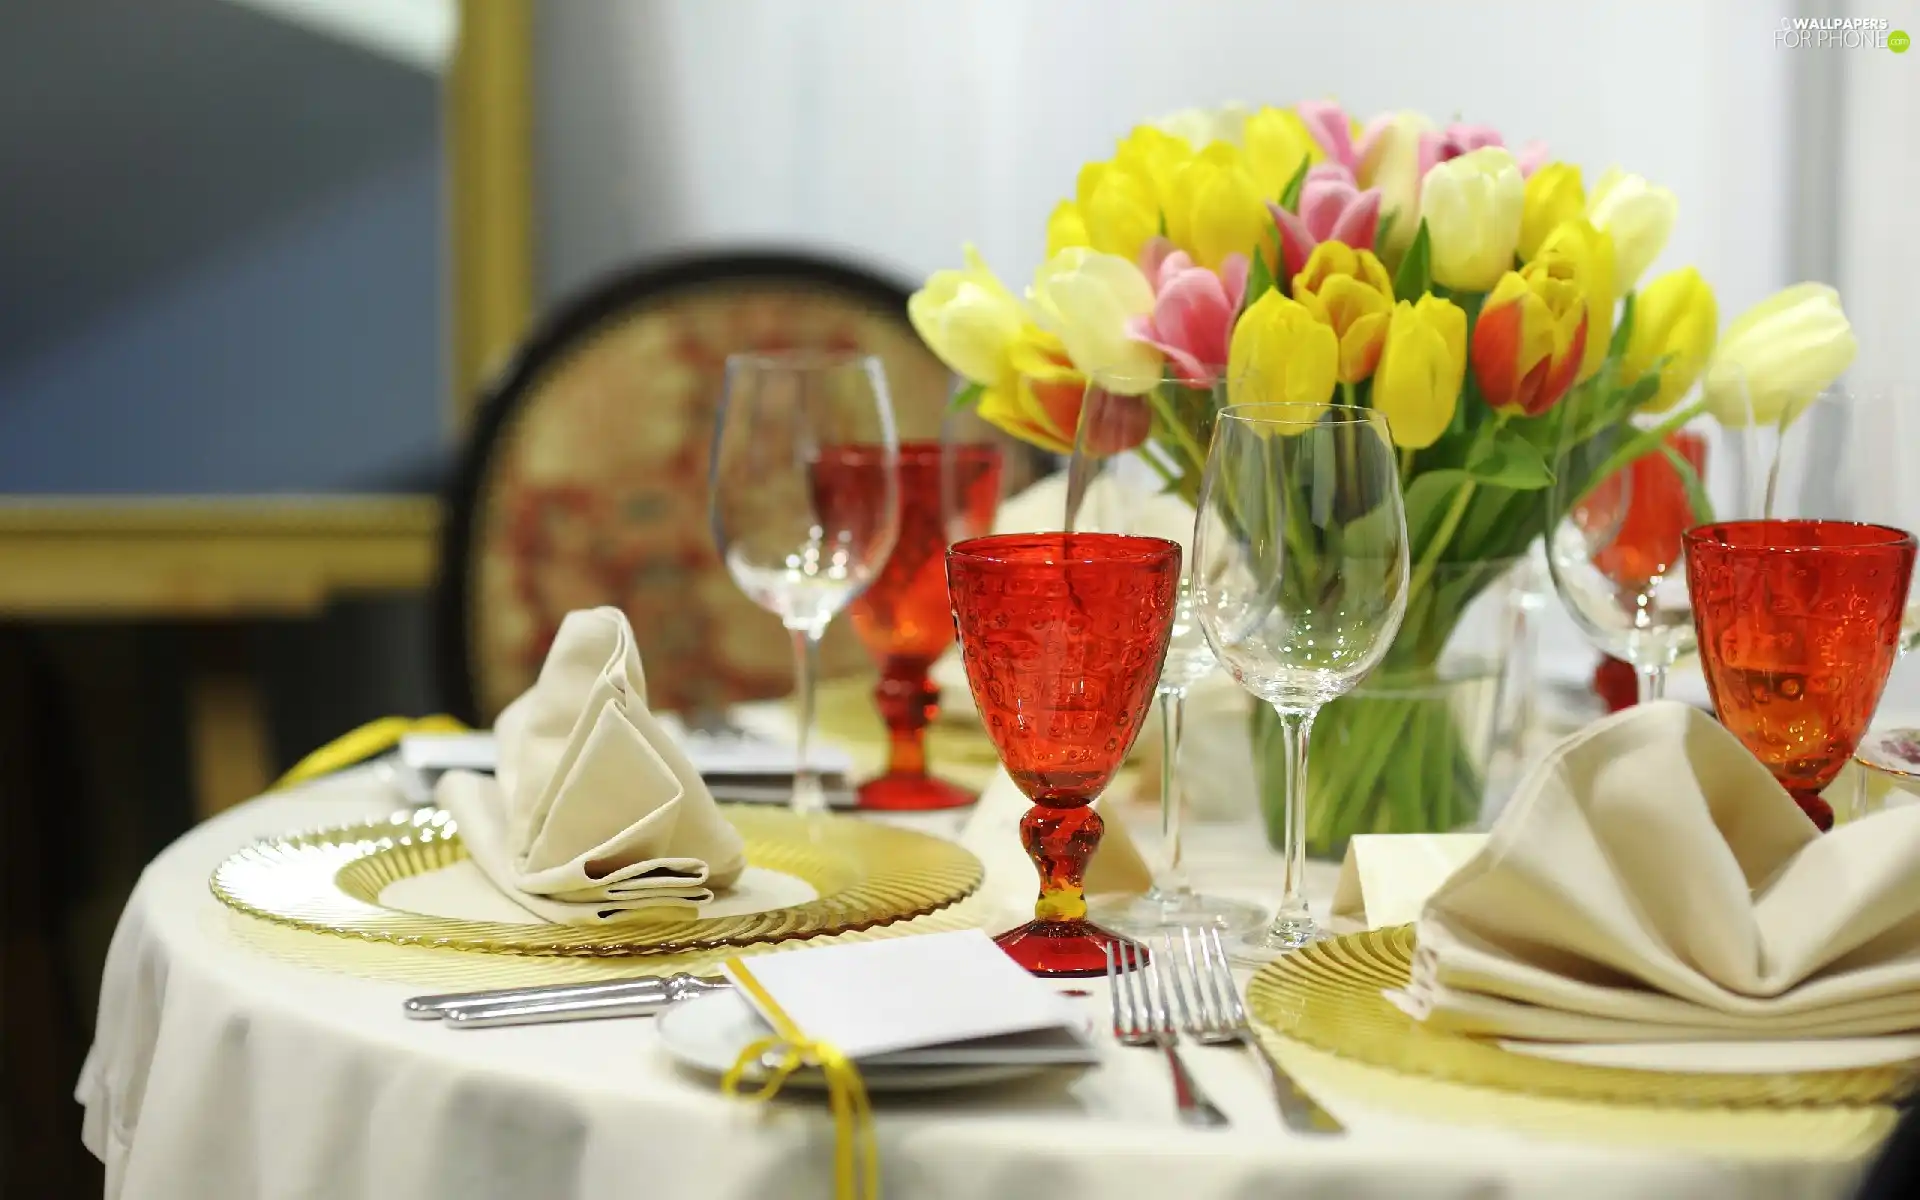 Tulips, service, table